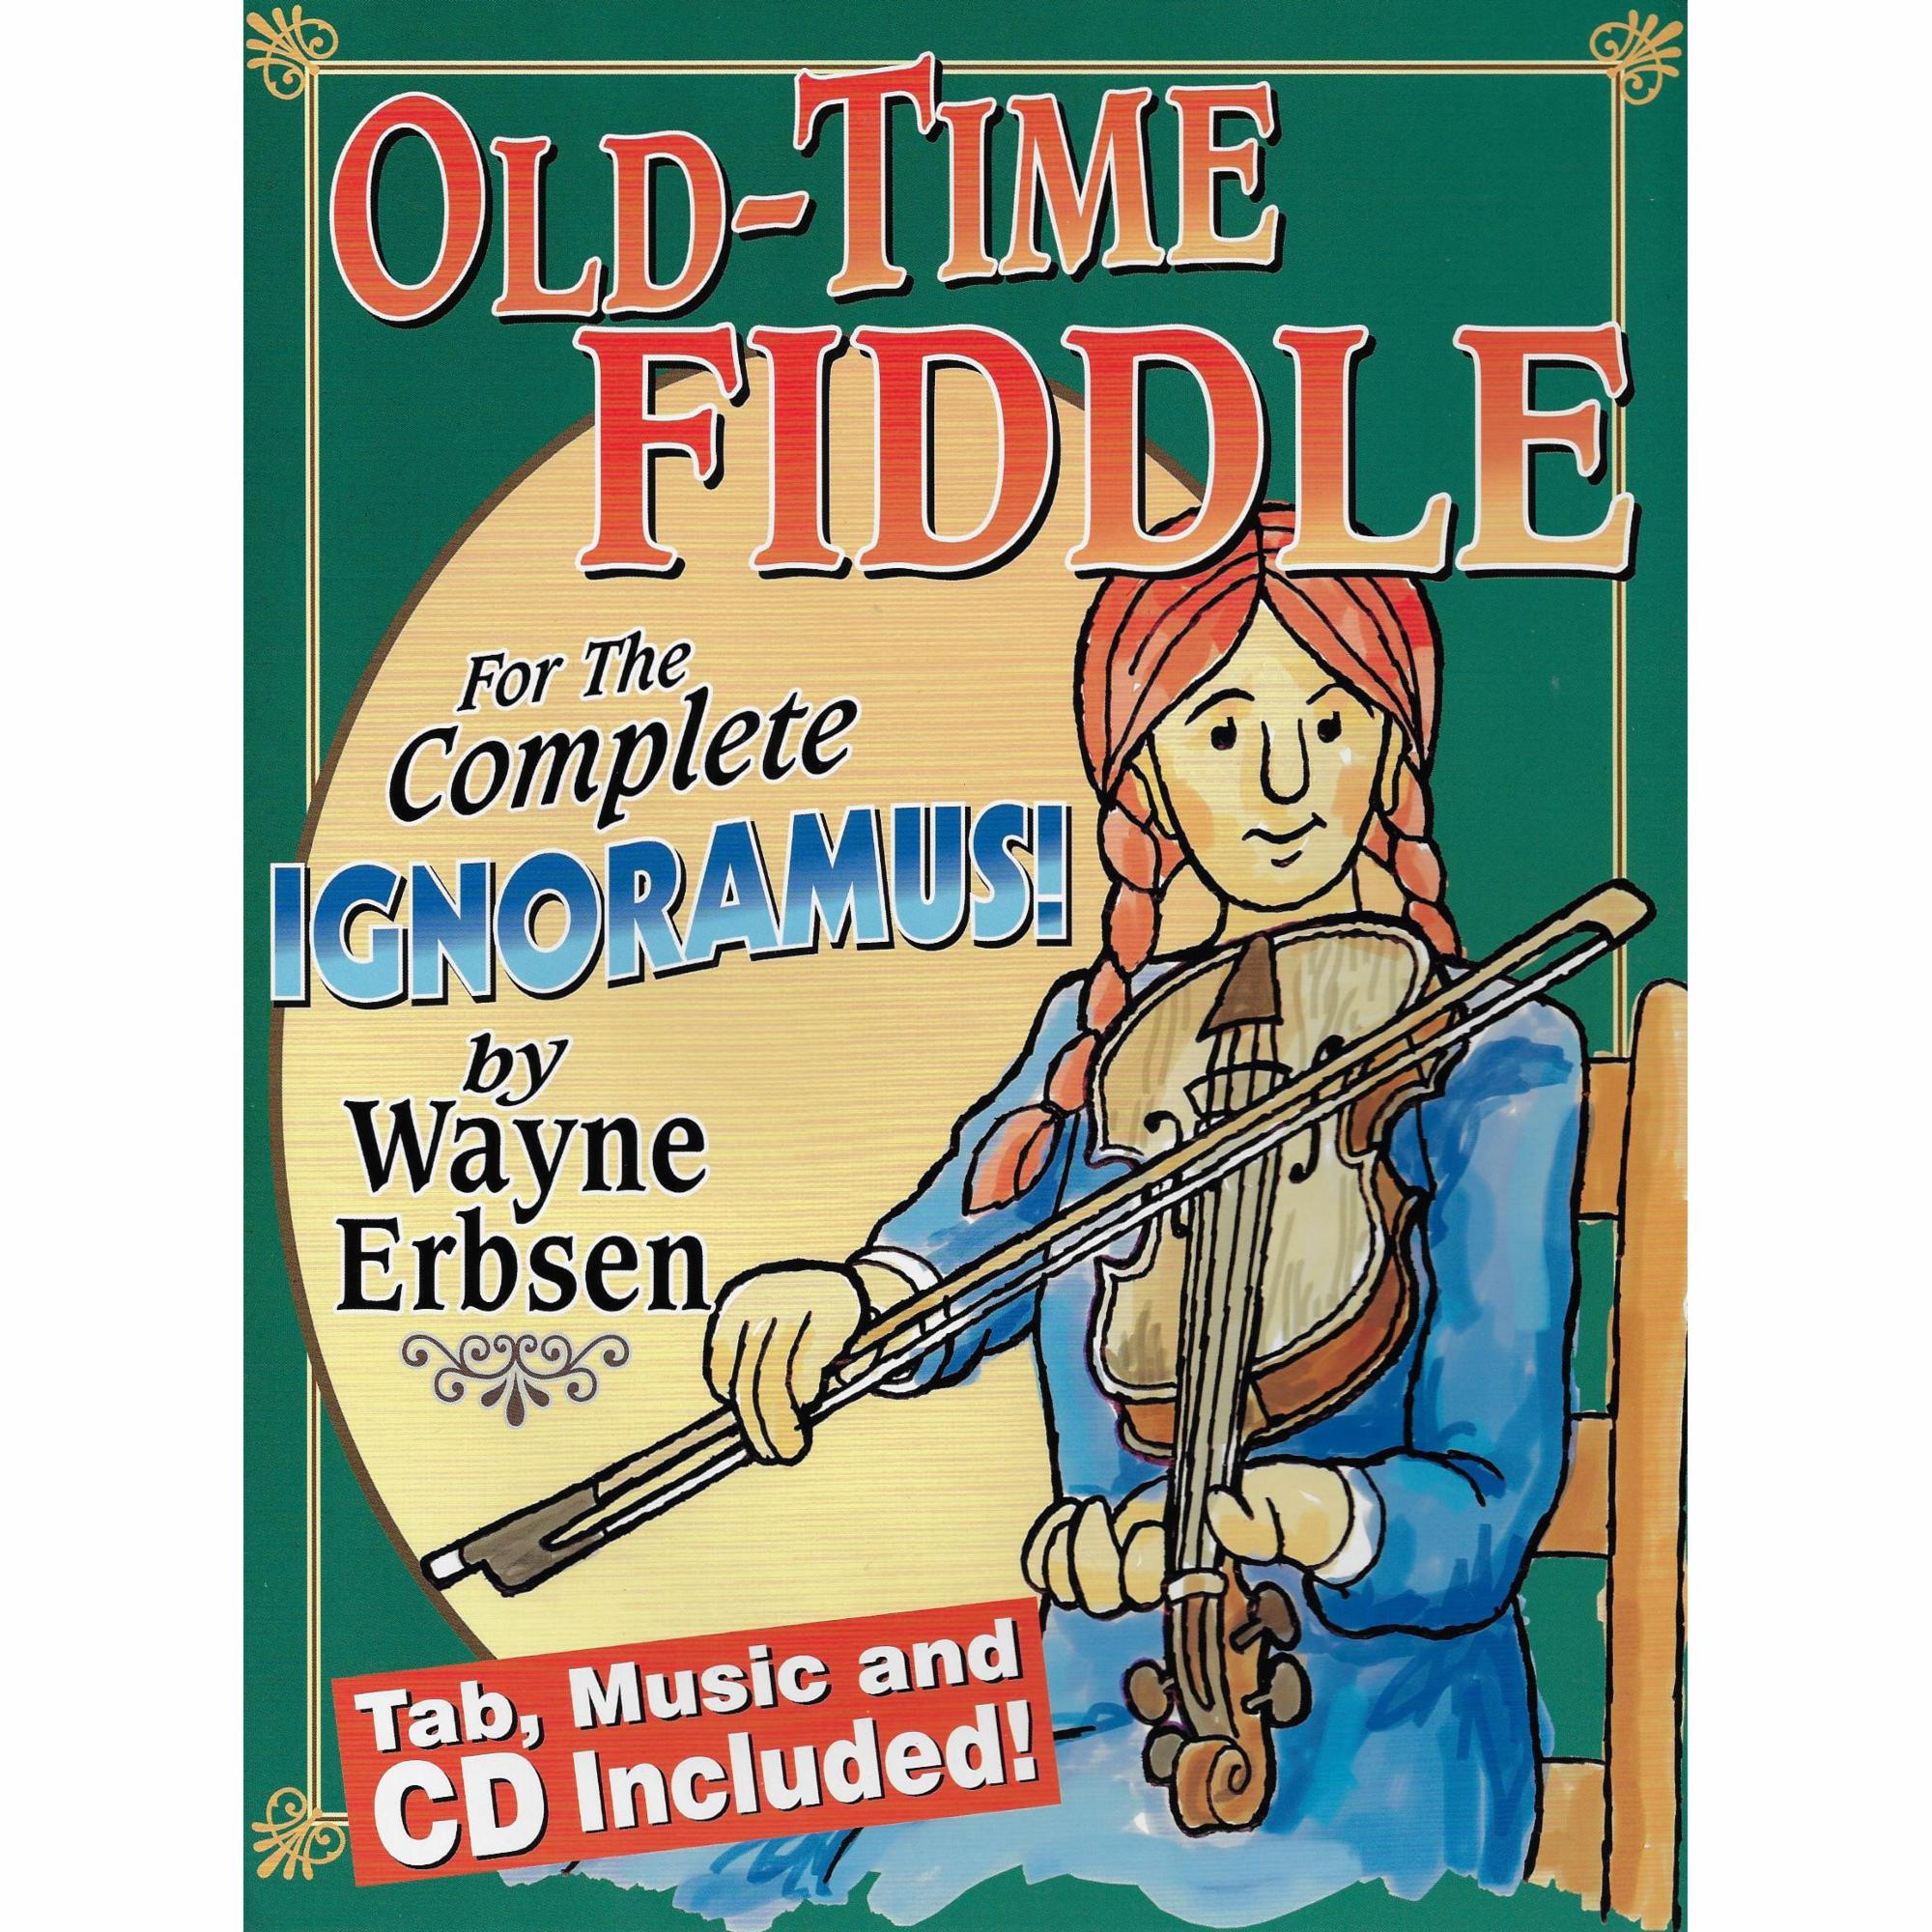 Old-Time Fiddle for the Complete Ignoramus